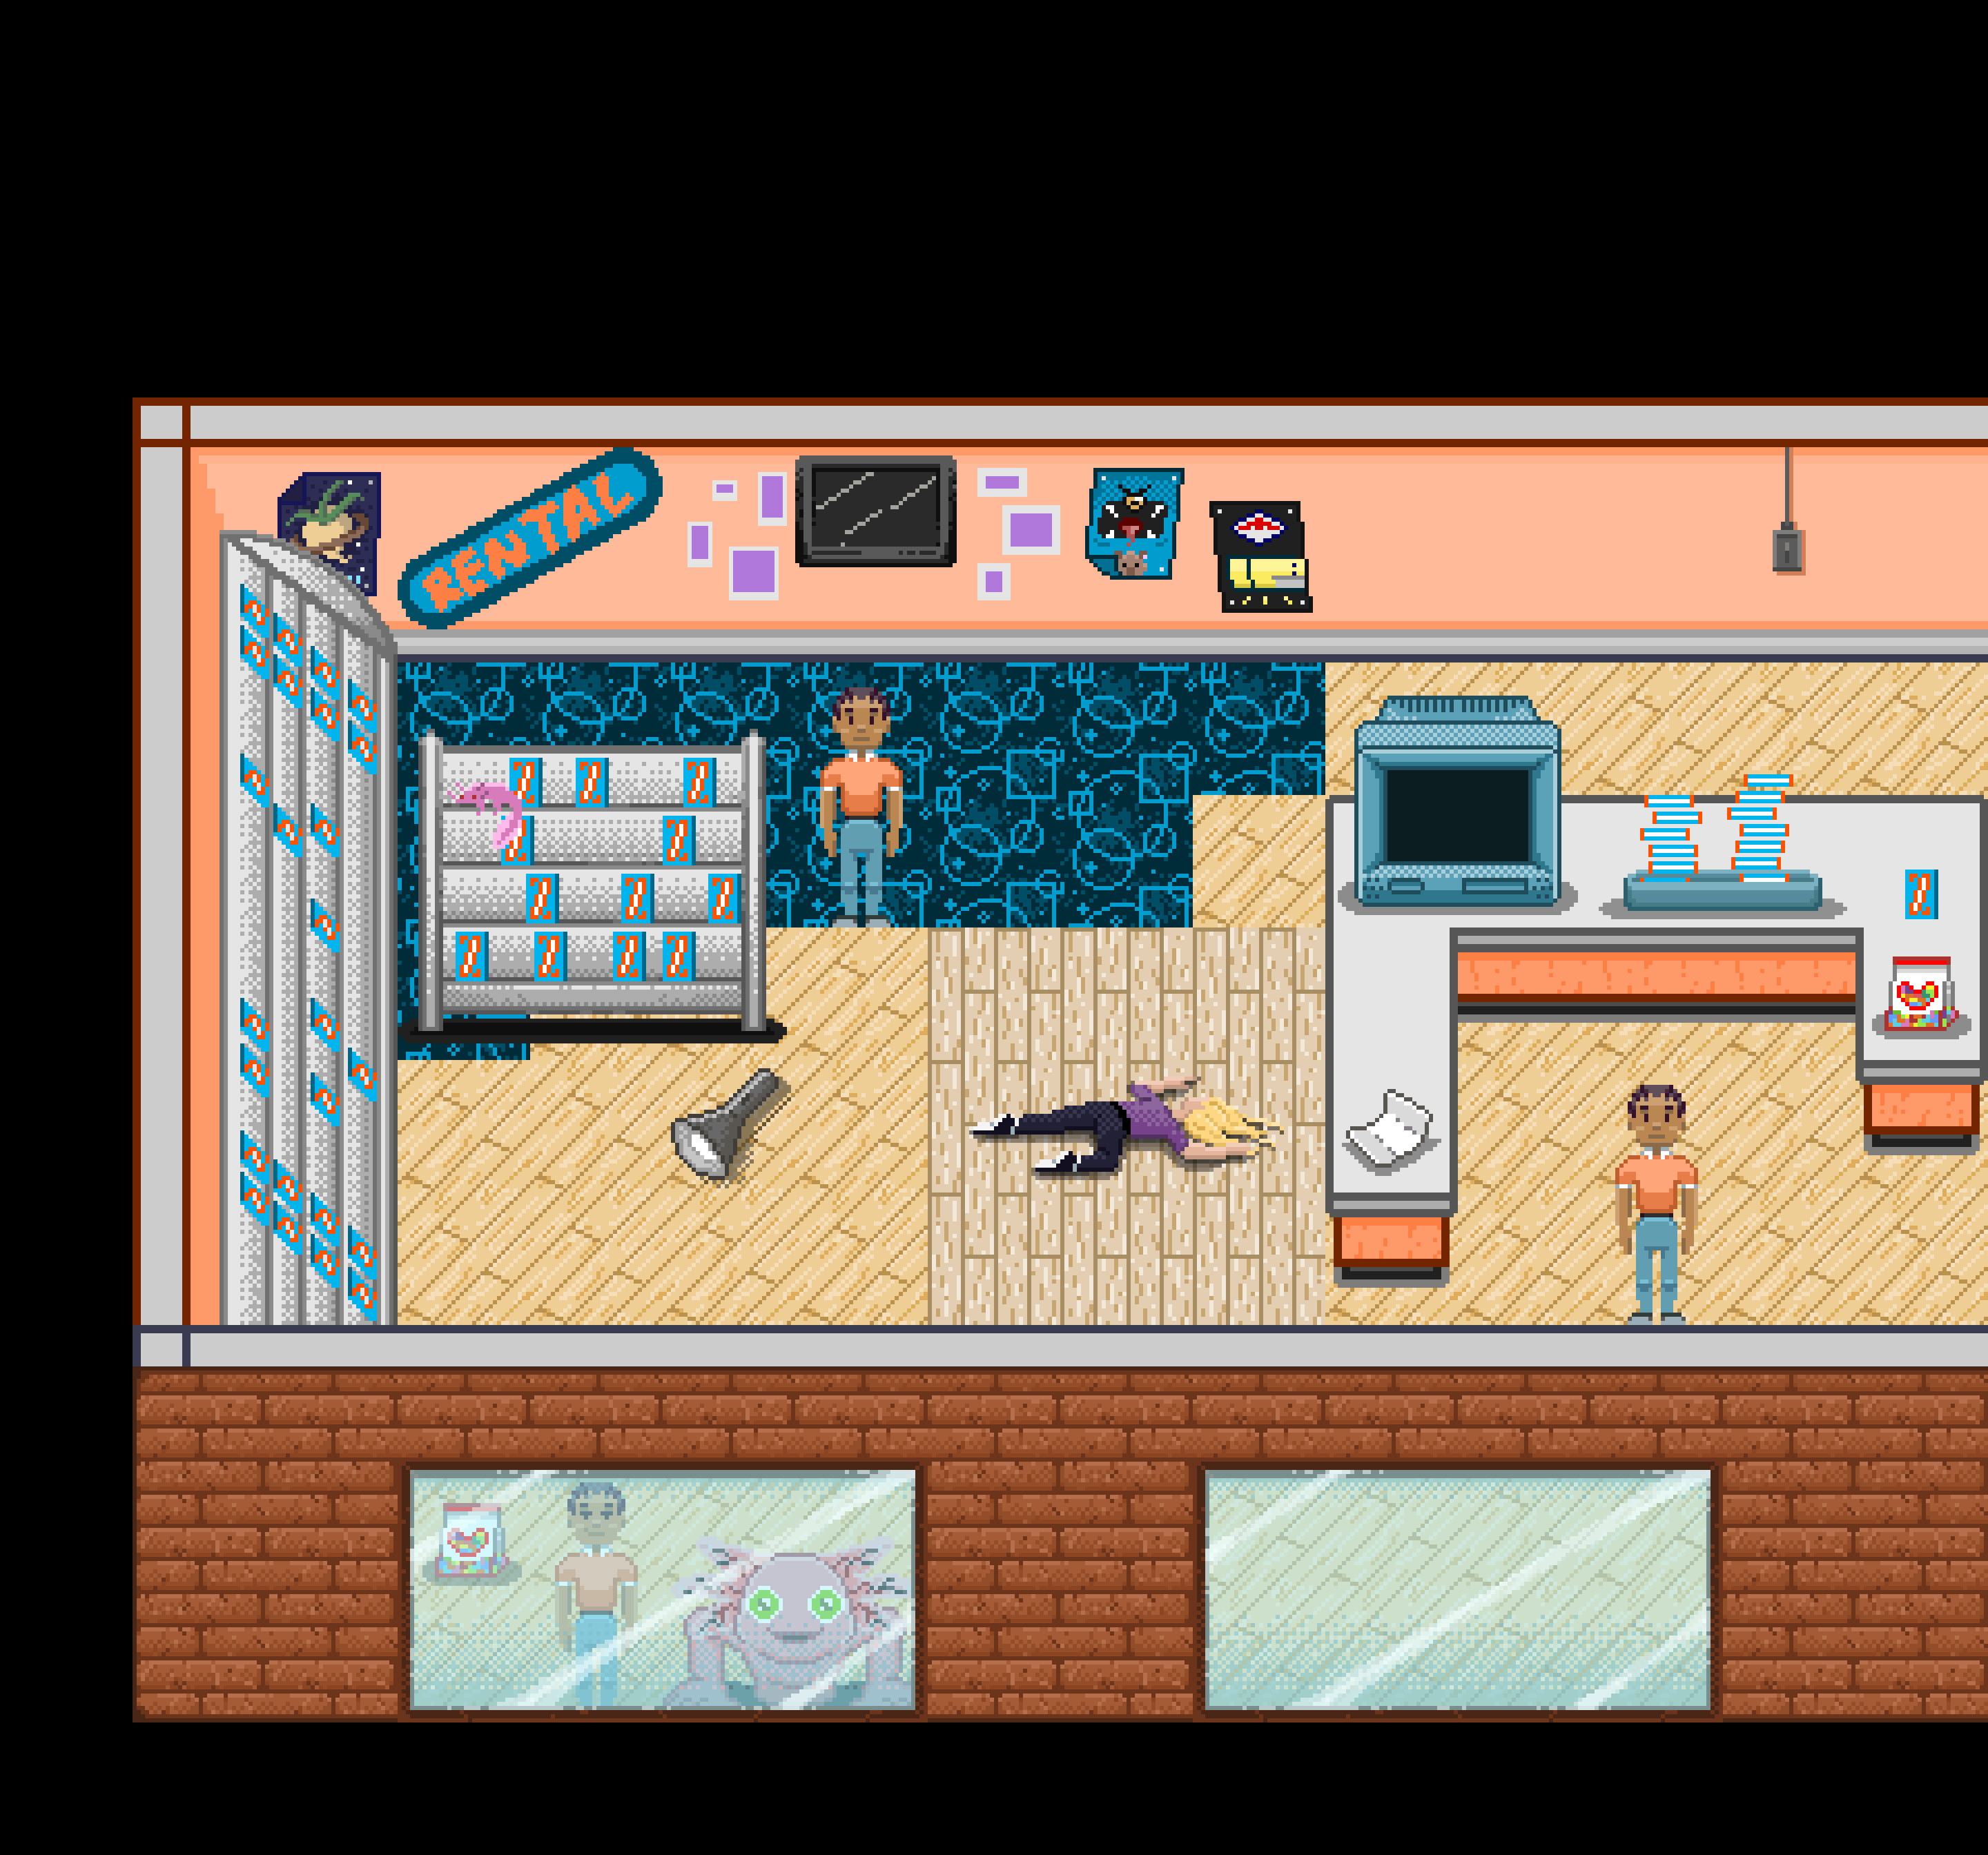 Beautiful Corner 1: Assets created for the game collected in one scene as an example of their contrast, and appearance in game. A saturated two-toned color scheme was modeled after Blockbuster stores in 80s and 90s.